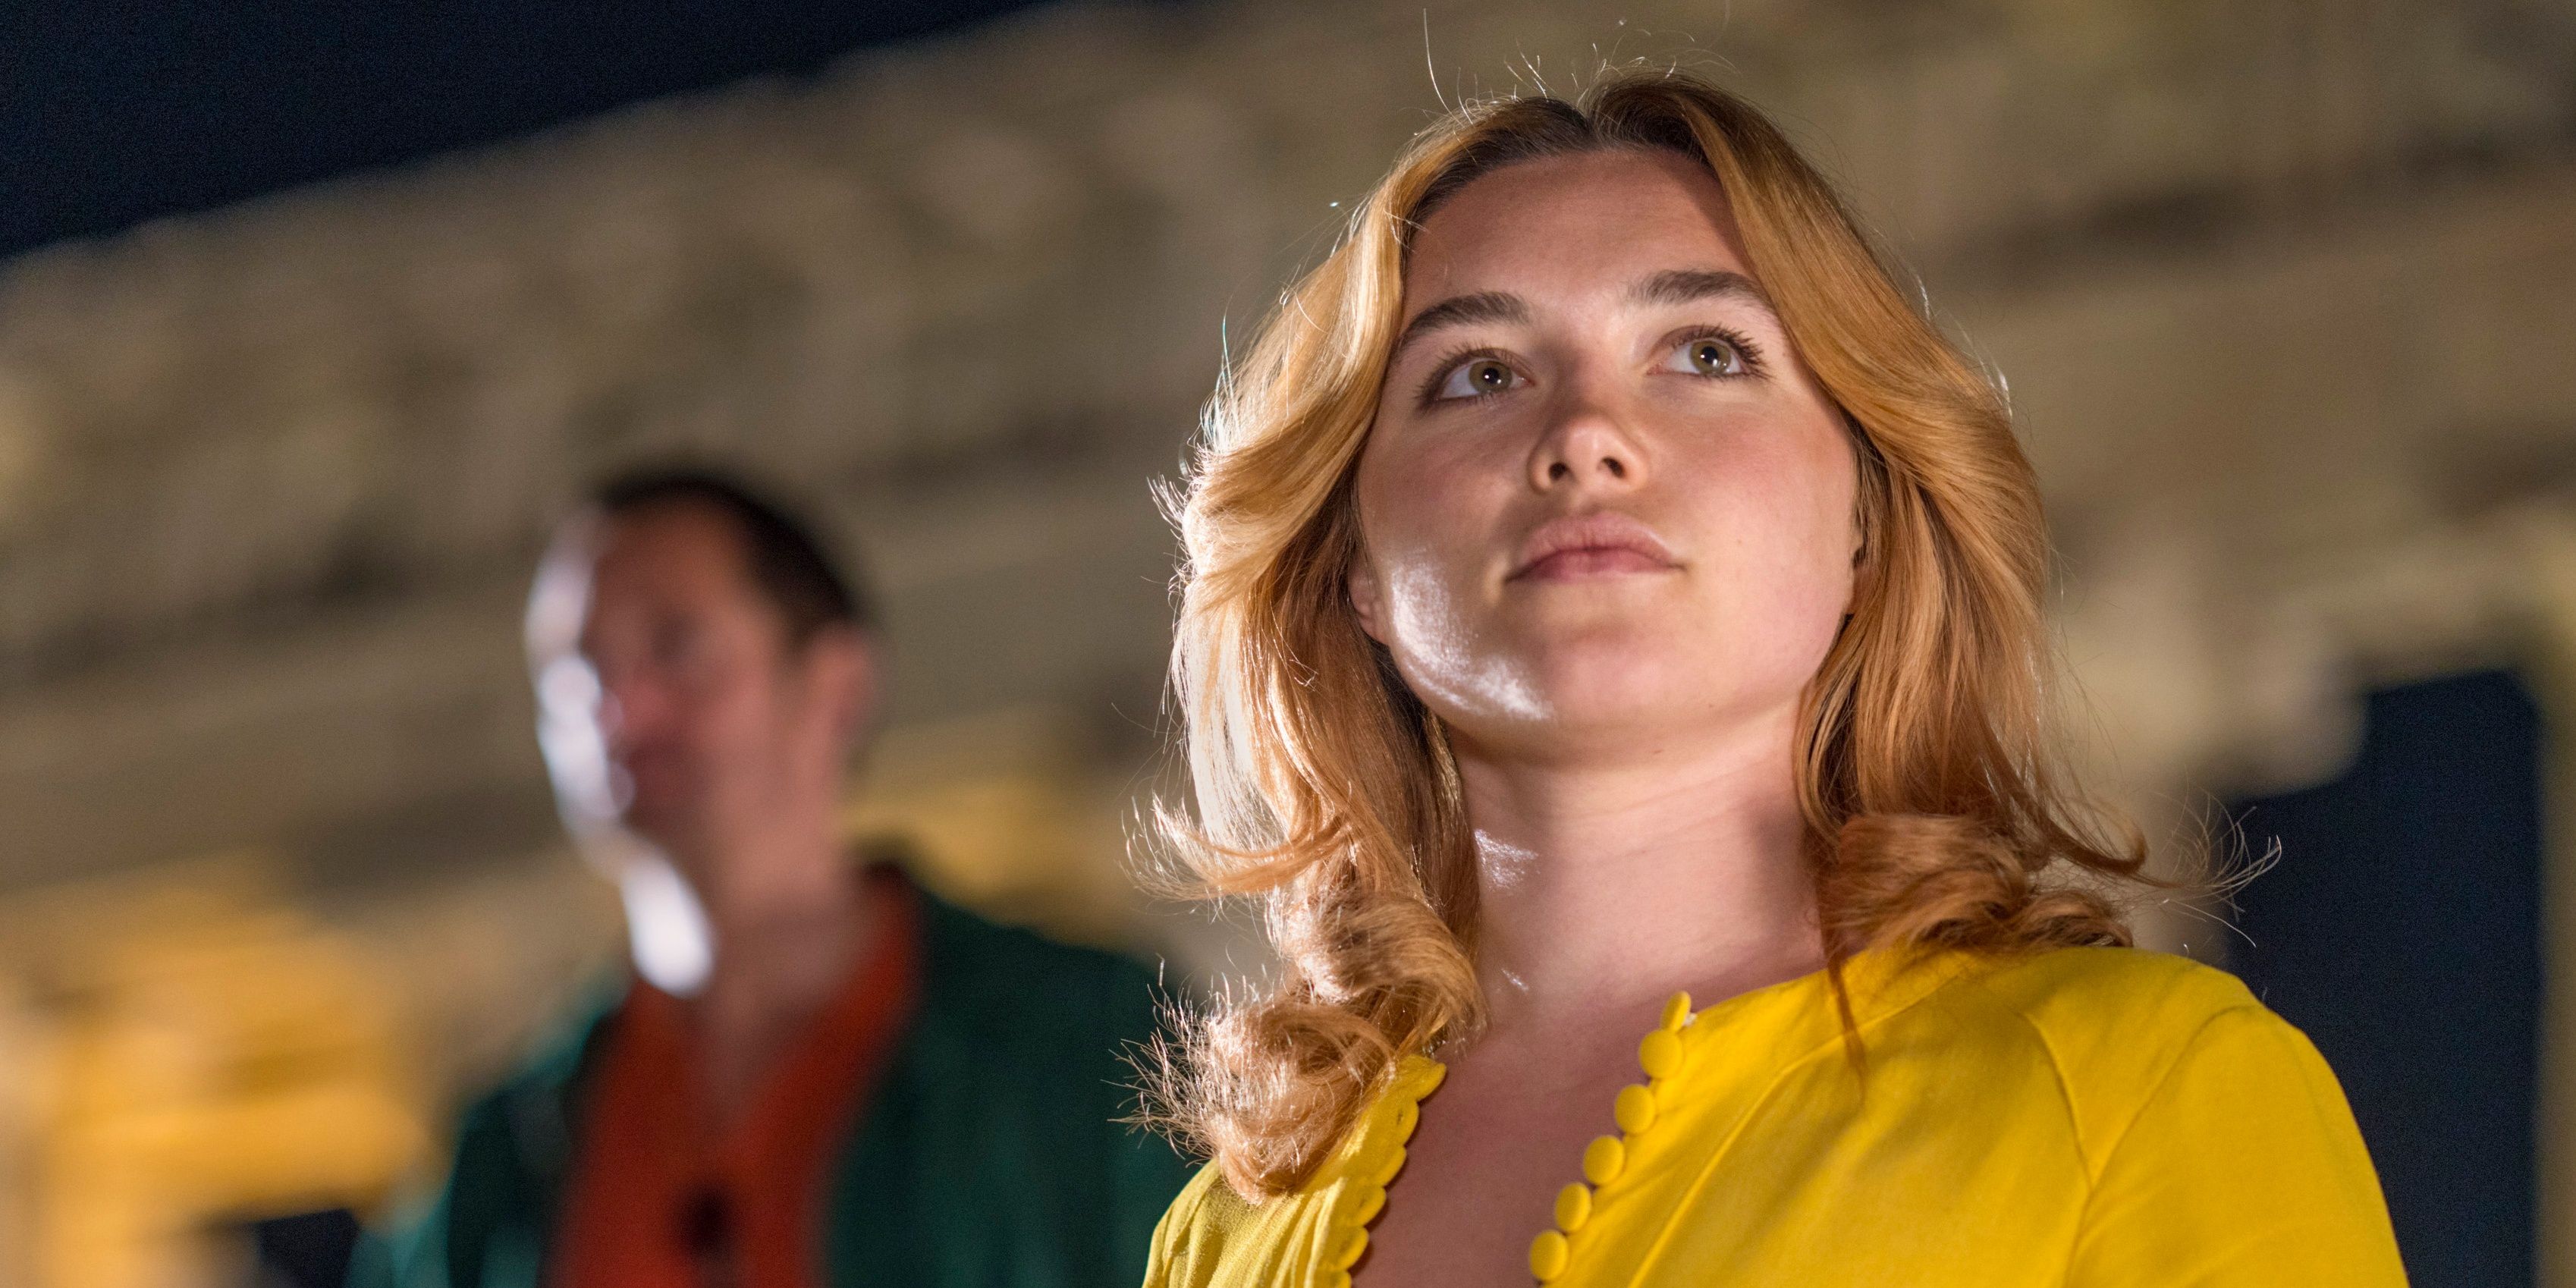 Florence Pugh in The Little Drummer Girl looks up and off camera in a yellow shirt.